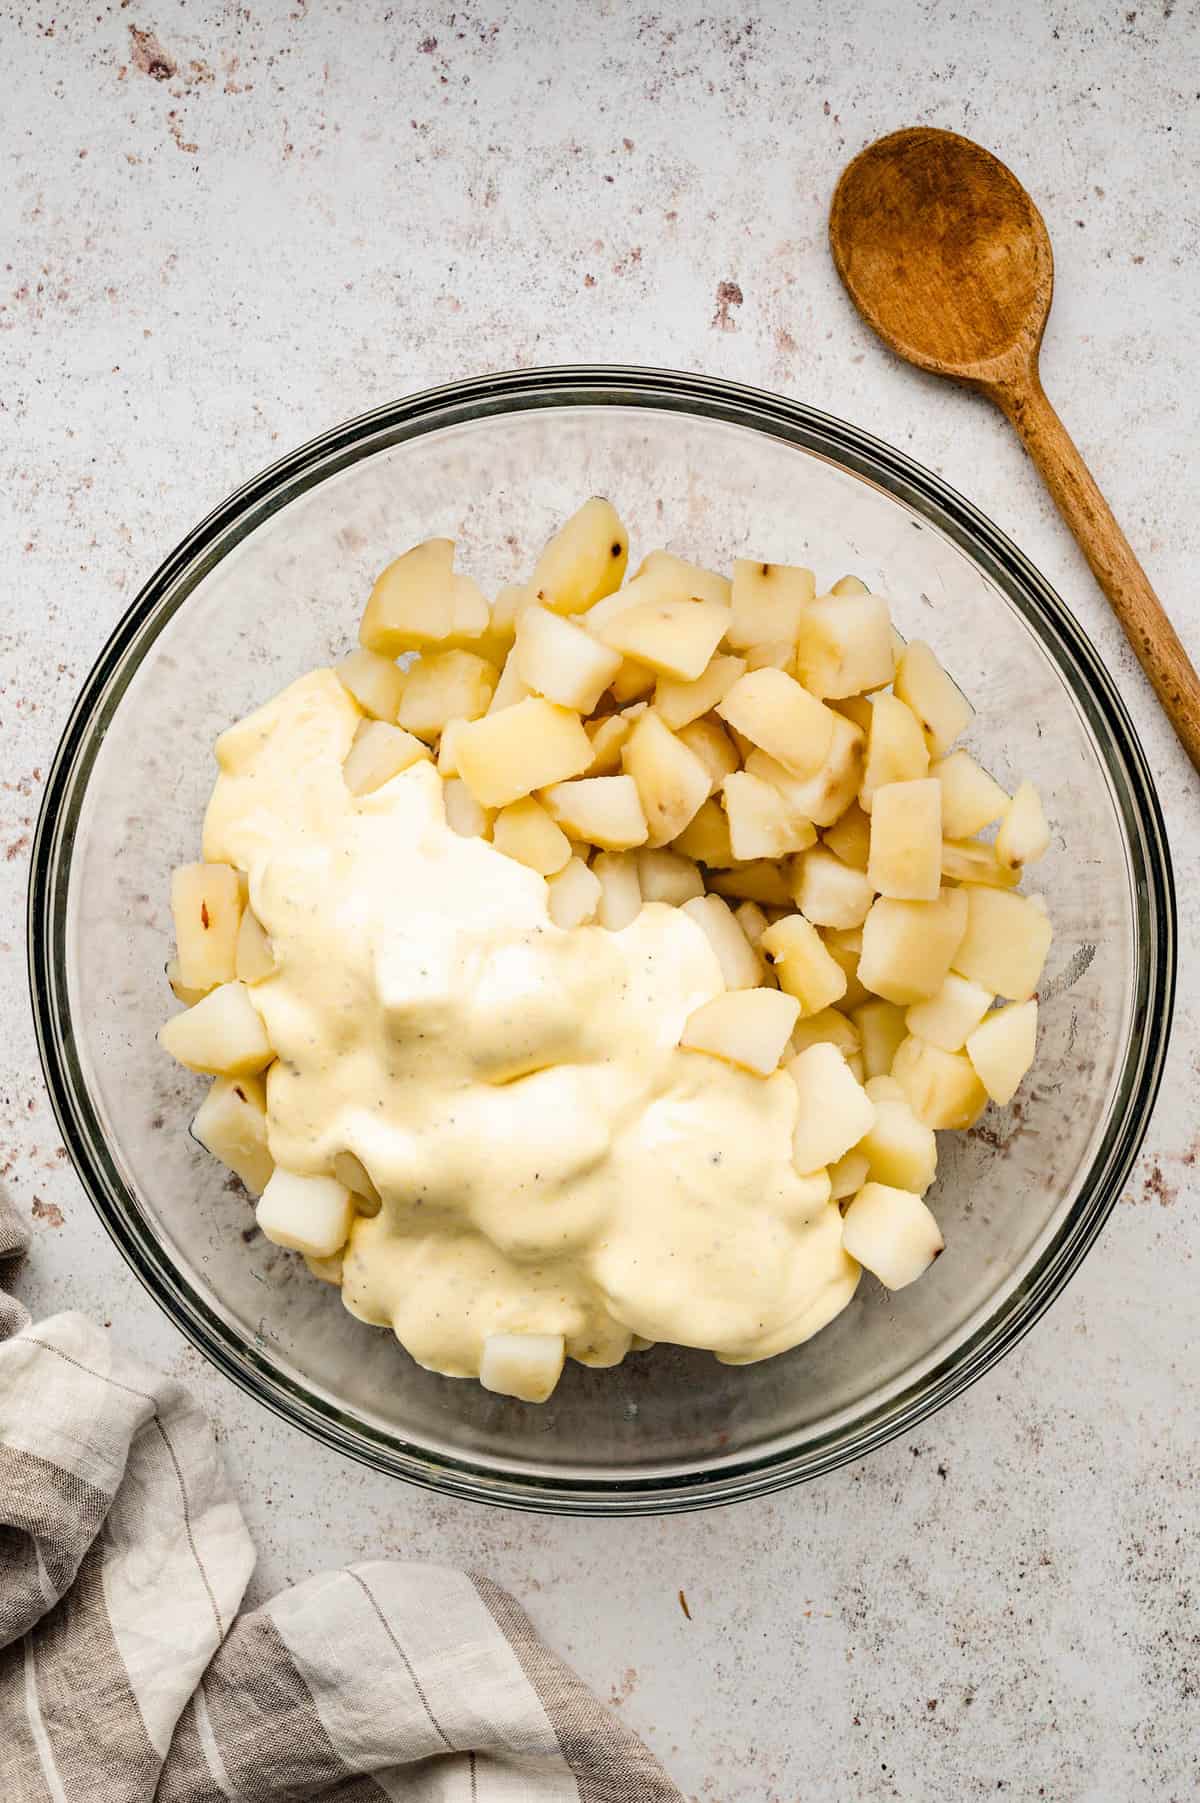 Adding dressing mixture to cooked diced potatoes in mixing bowl for homemade potato salad